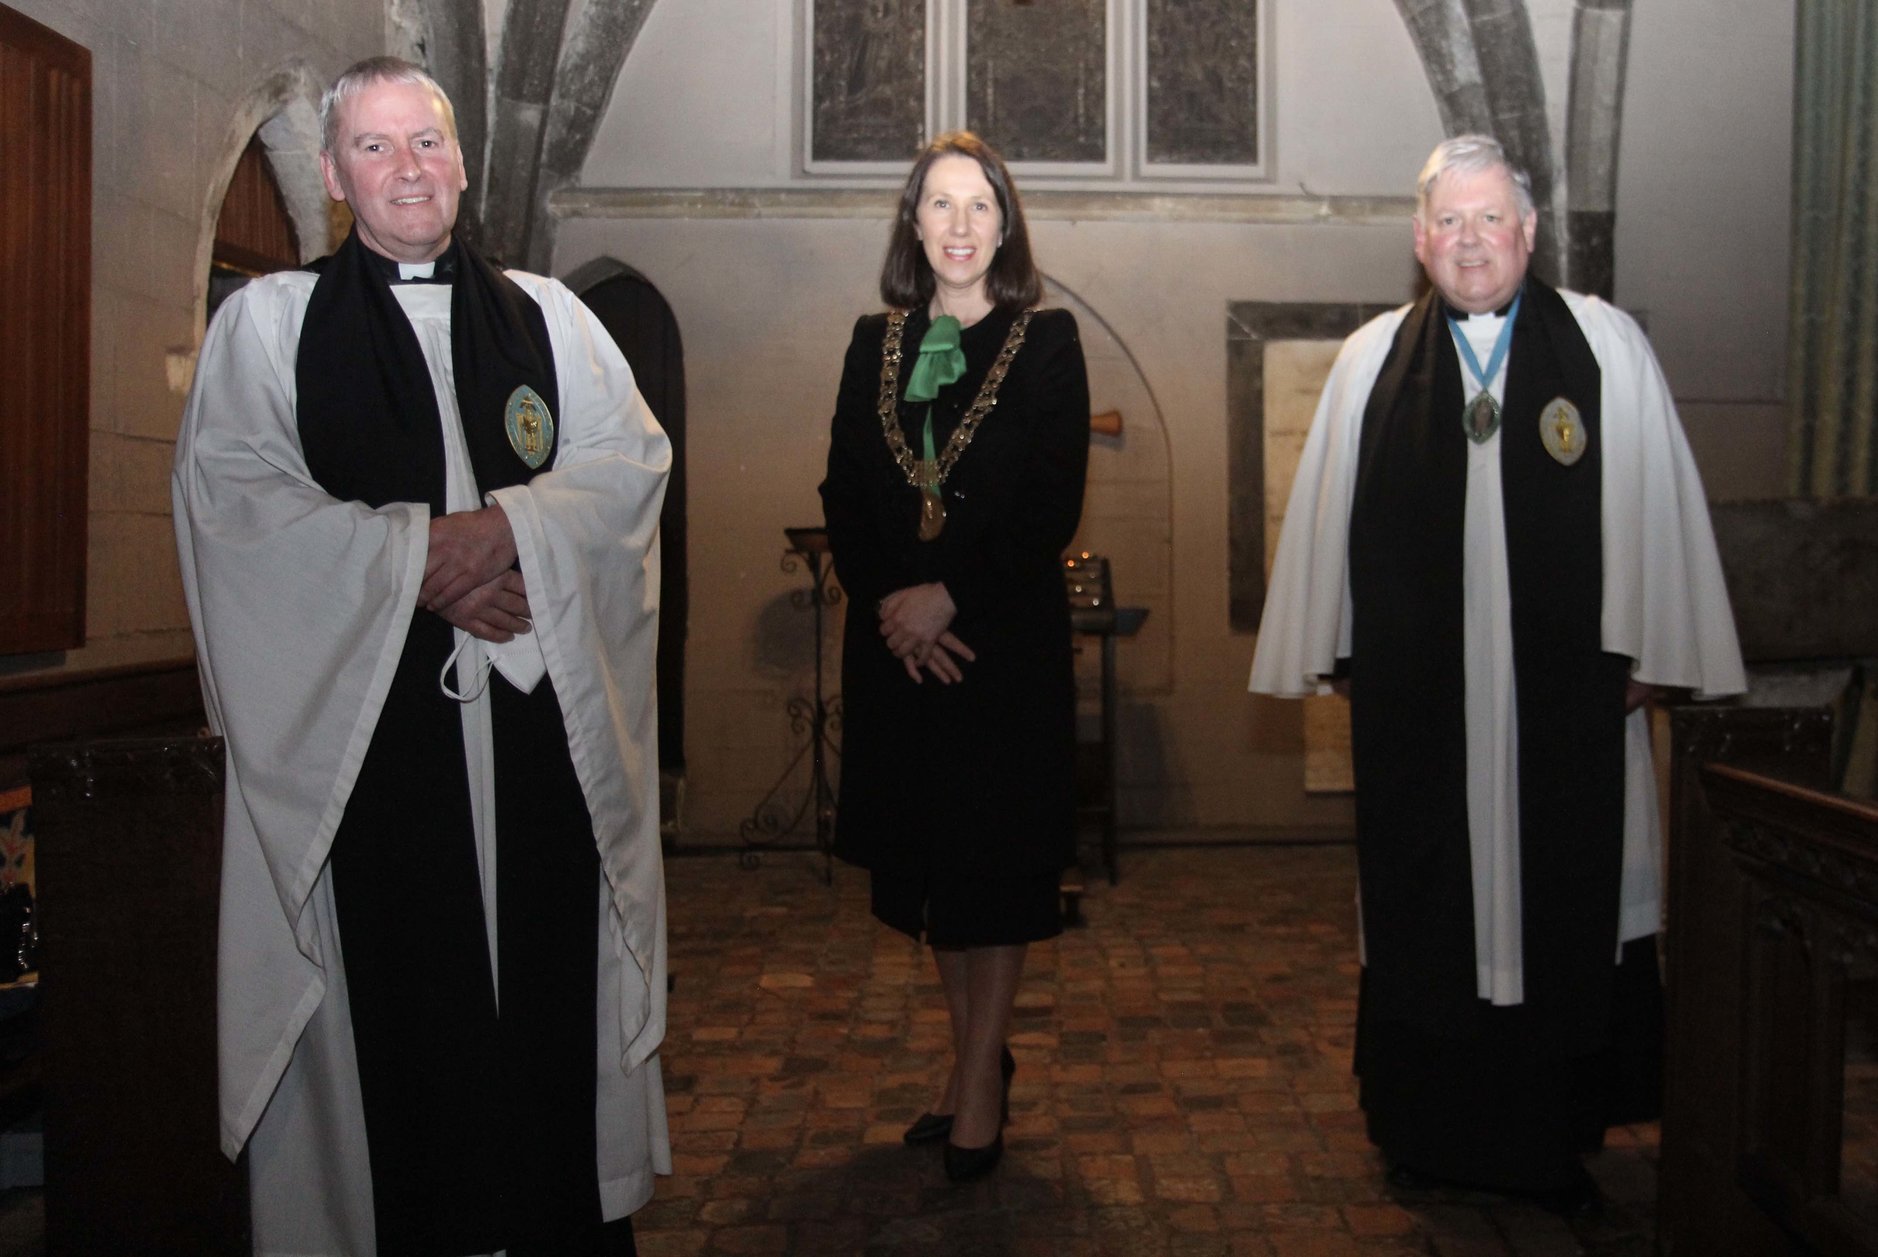 The Lord Mayor of Dublin Alison Gilliland (centre) with Canon Charles Mullen and Dean William Morton.